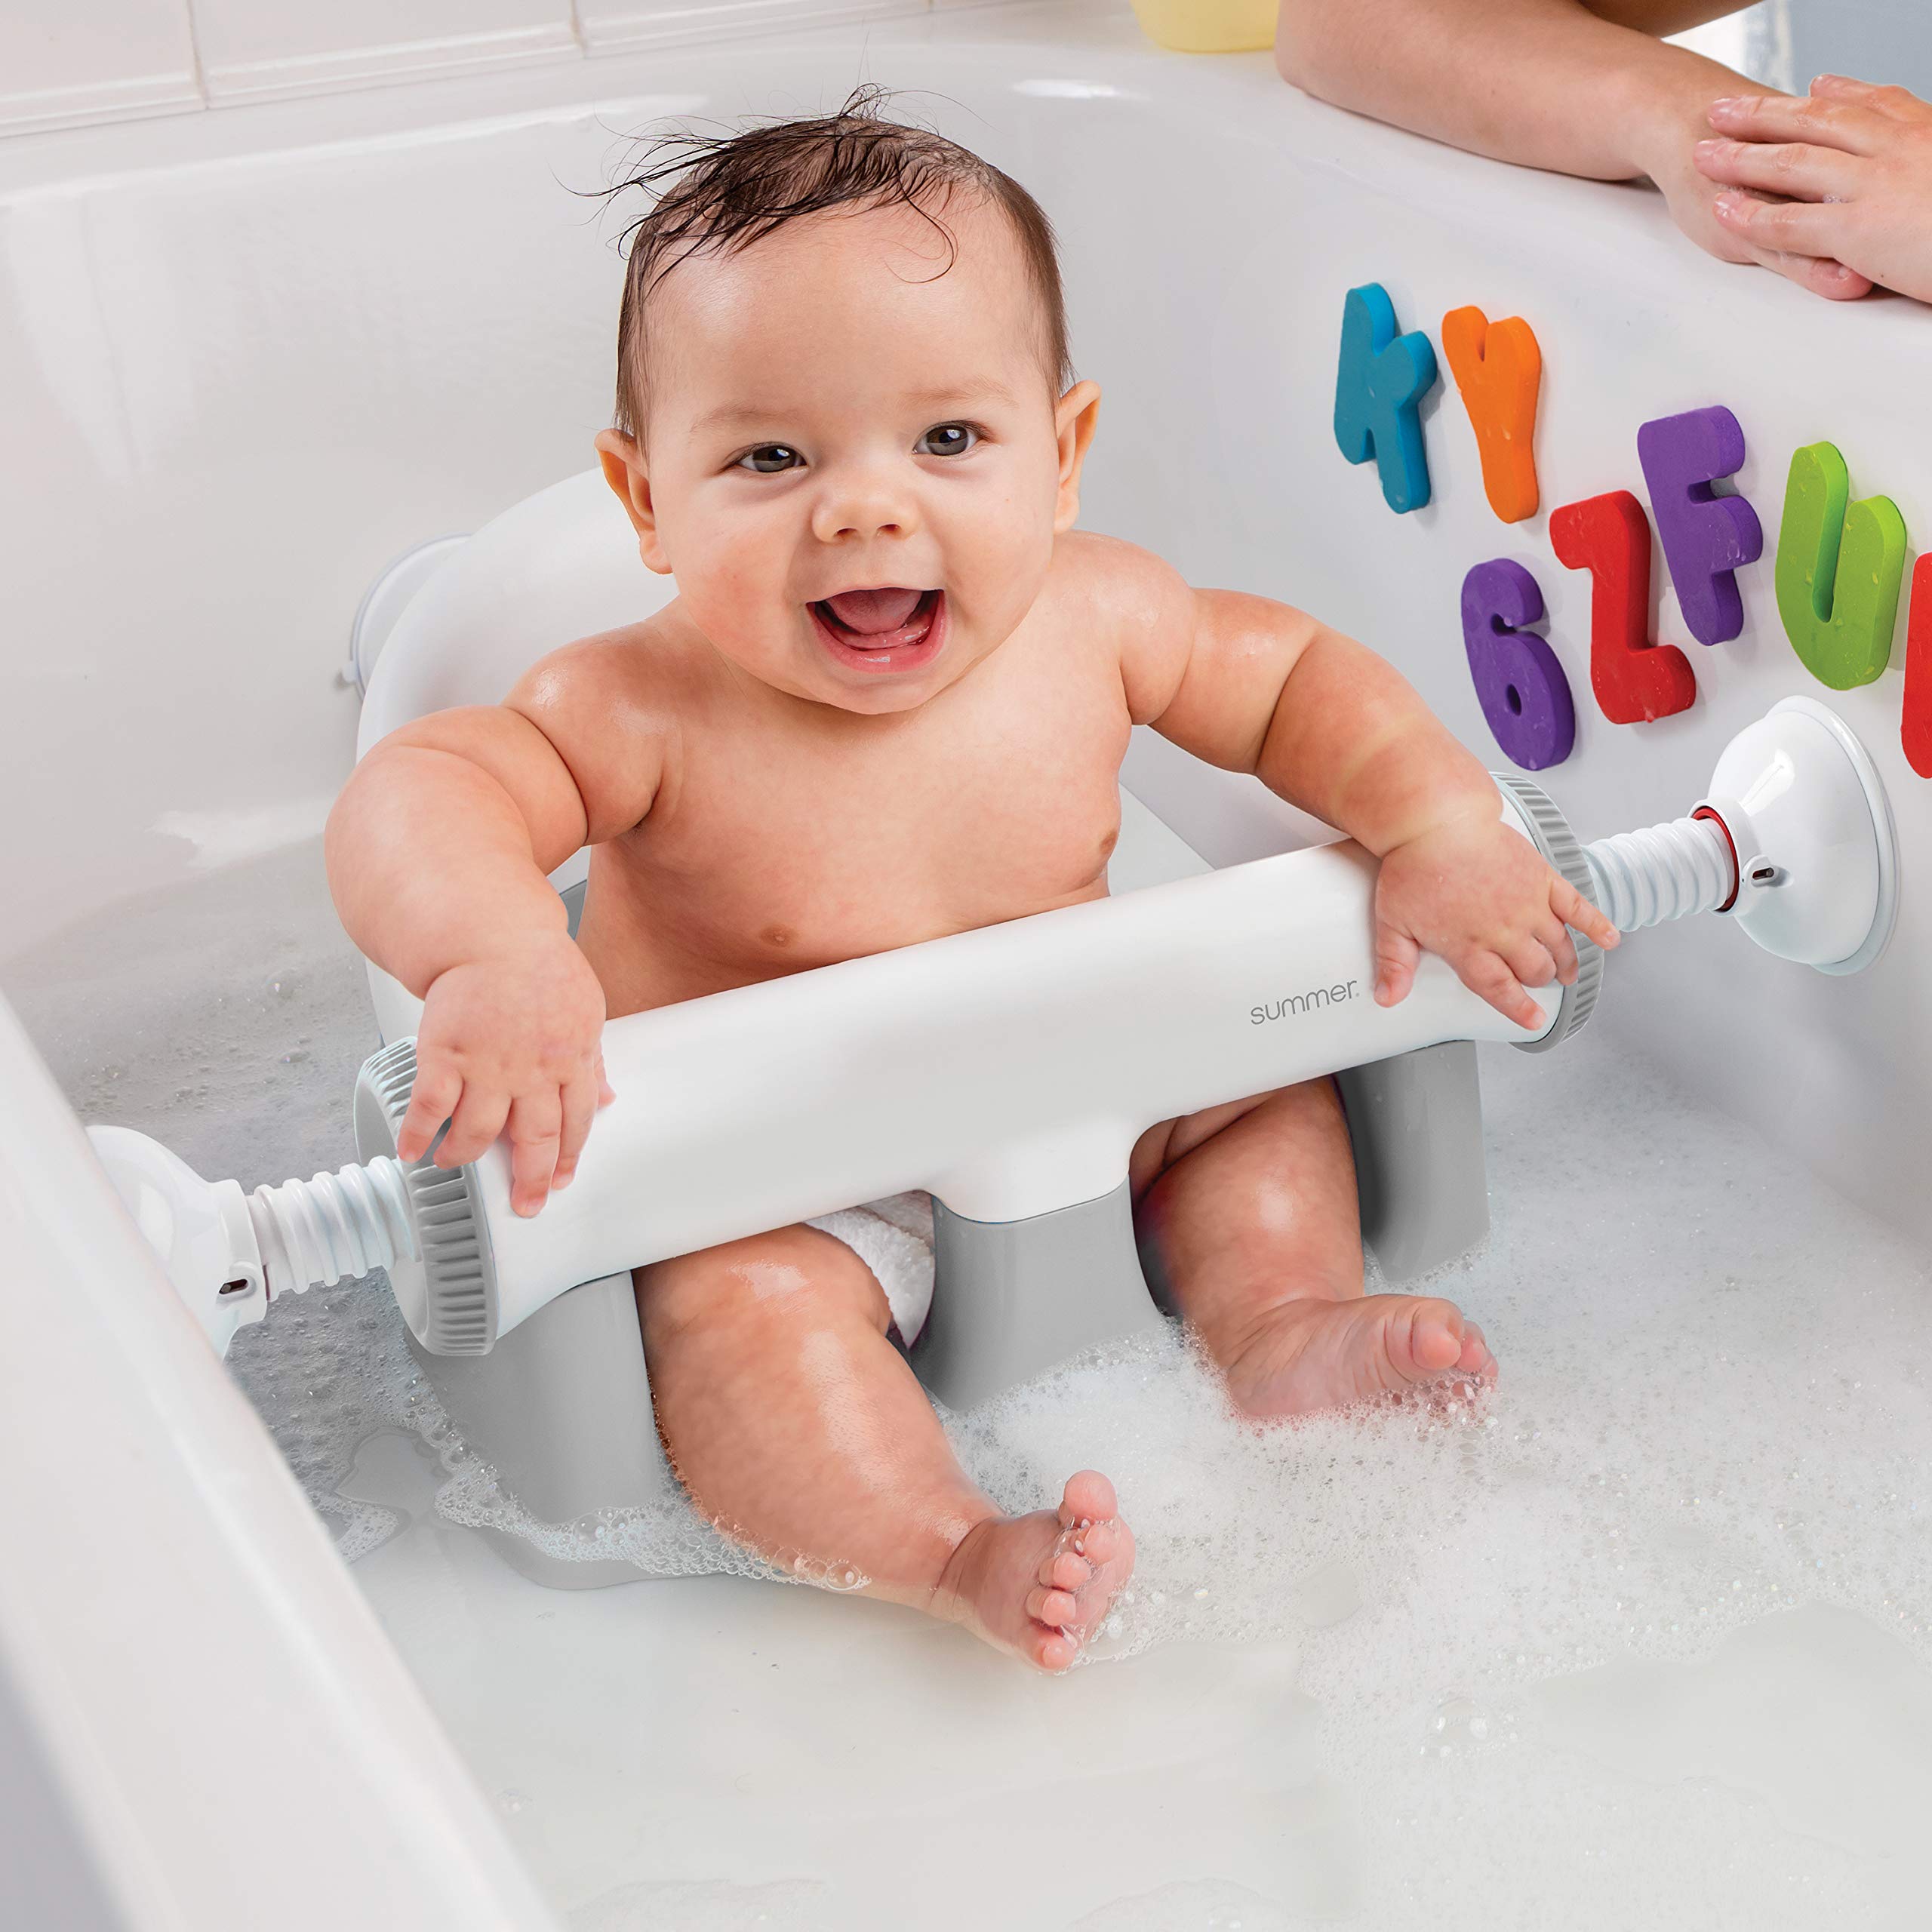 Summer My Bath Seat for Sit-Up Baby Bathing, Backrest for Assisted Sitting, Easy Setup & Storage, Gray